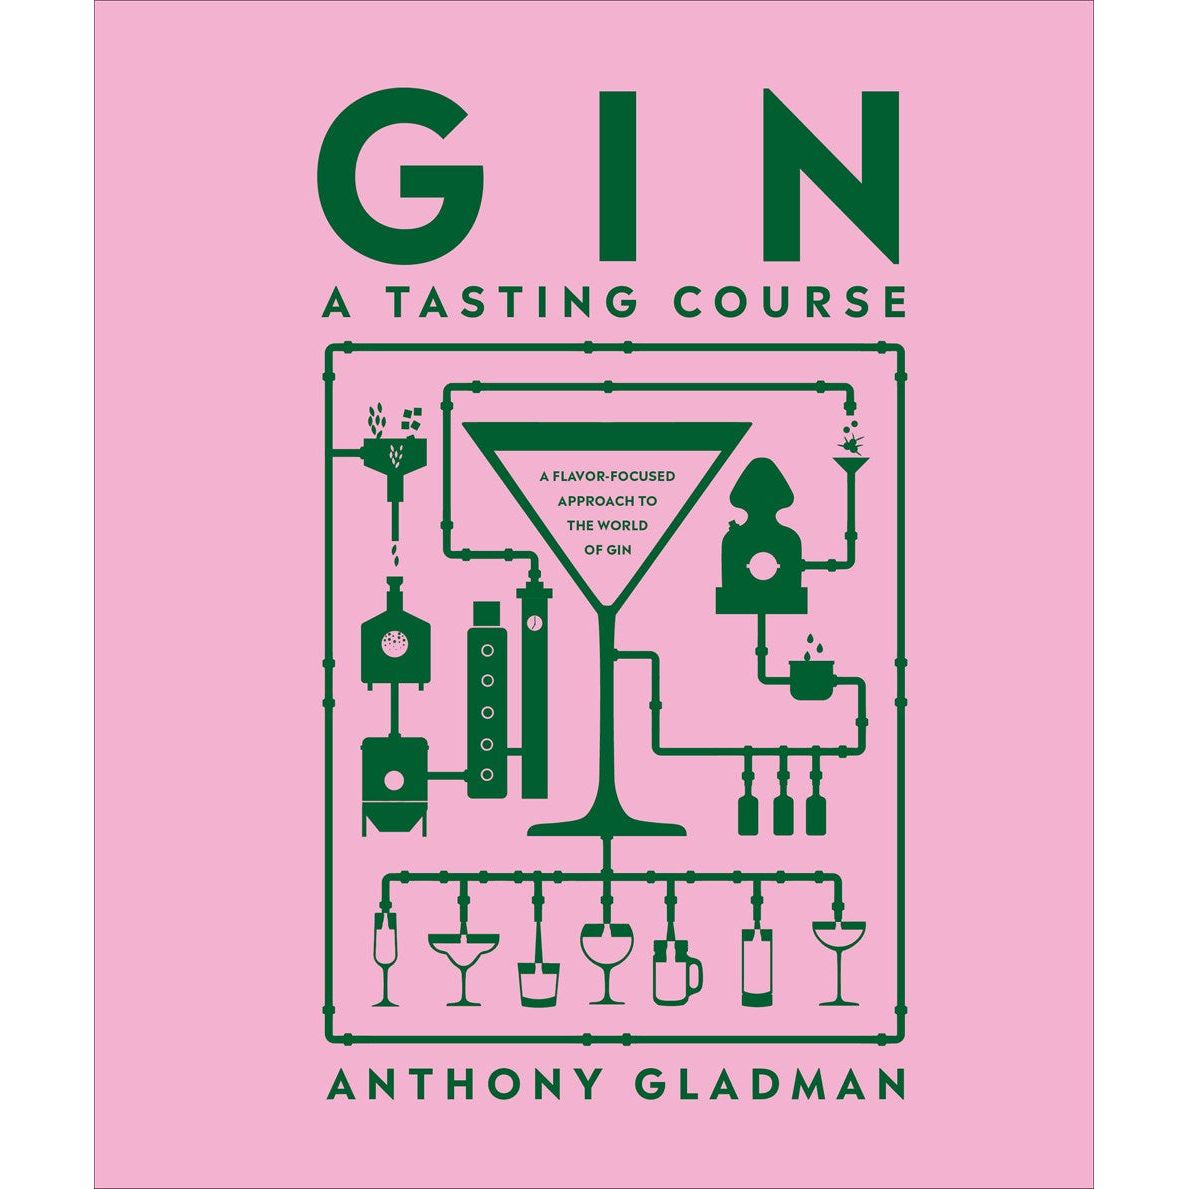 Gin A Tasting Course : A Flavor-focused Approach to the World of Gin (Anthony Gladman)